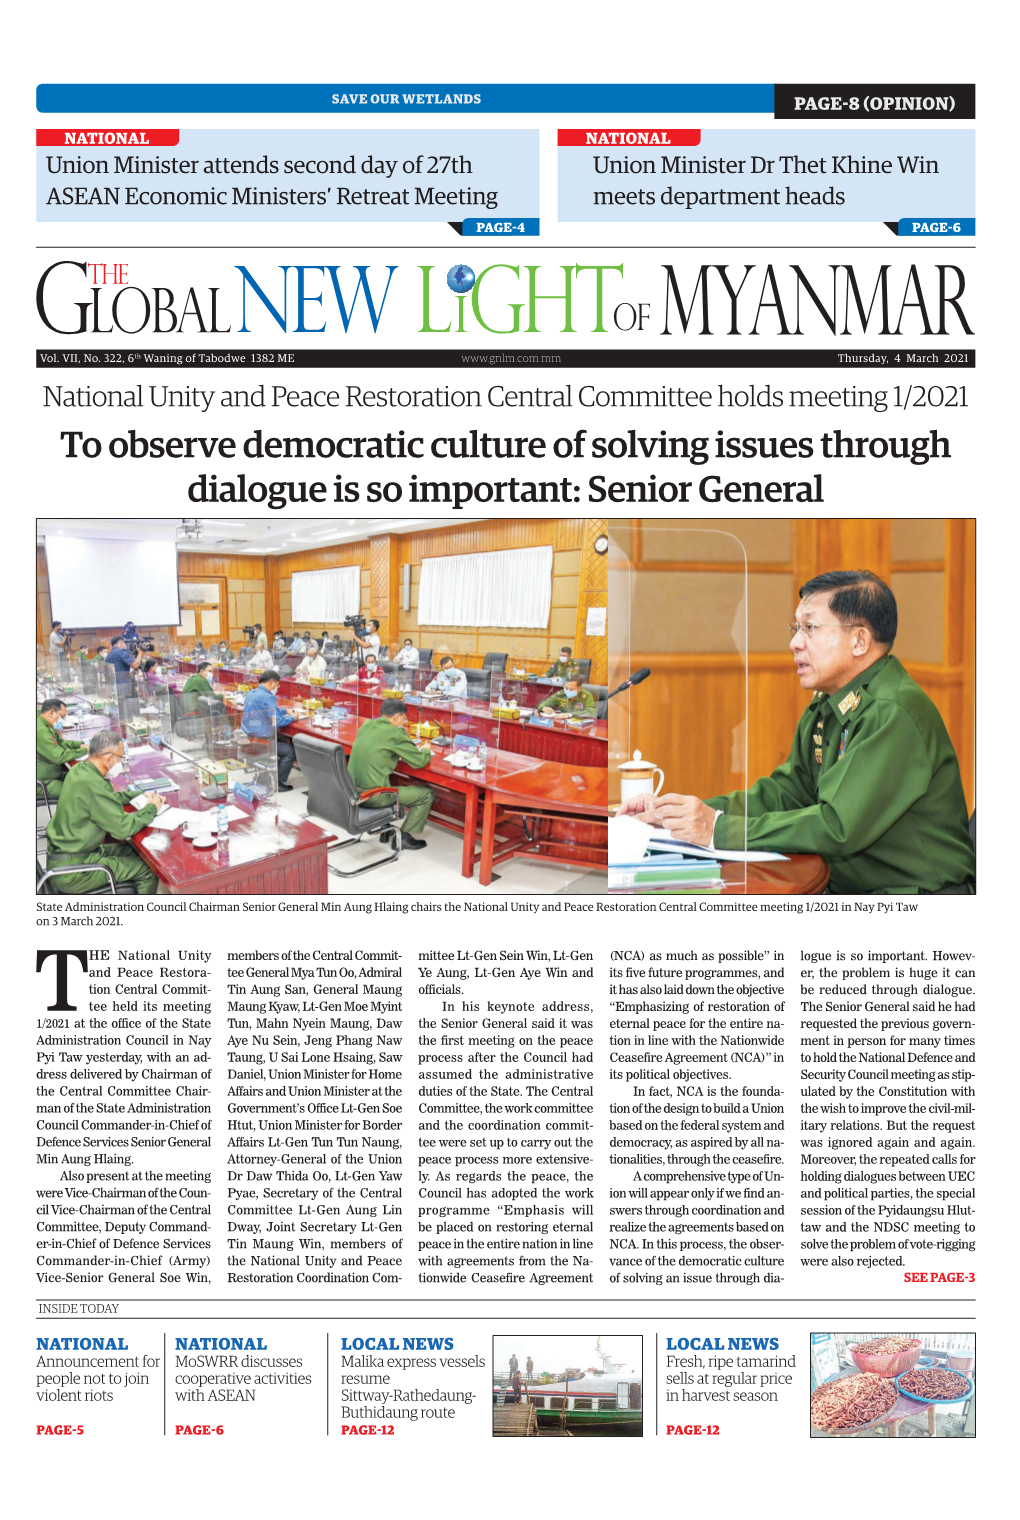 To Observe Democratic Culture of Solving Issues Through Dialogue Is So Important: Senior General